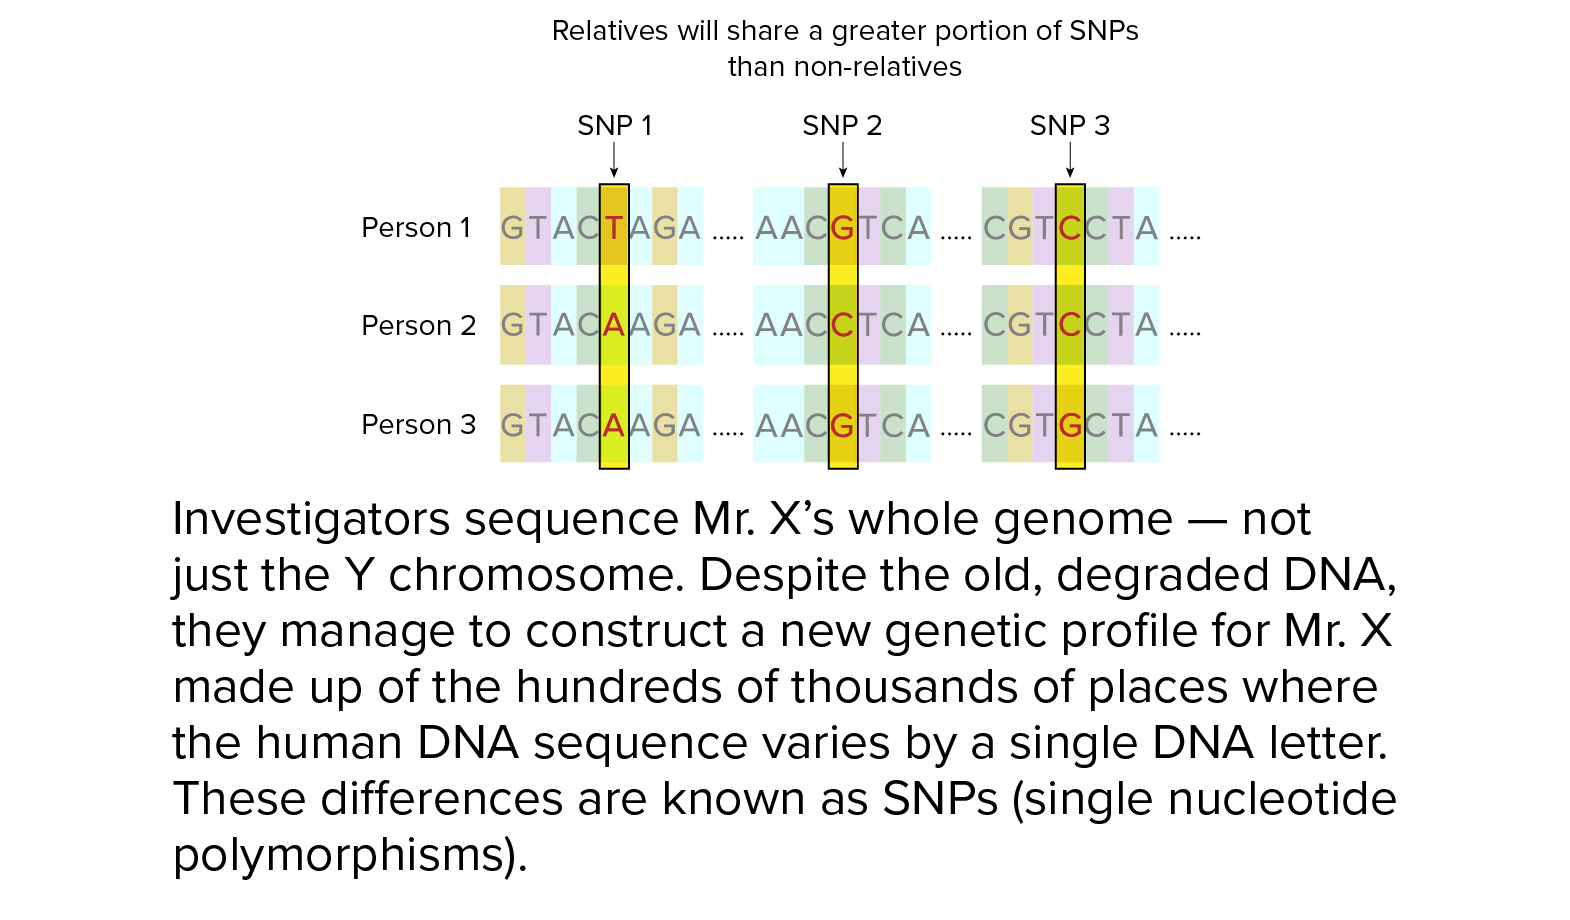 Investigators sequence Mr. X’s whole genome — not just the Y chromosome. Despite the old, degraded DNA, they manage to construct a new genetic profile for Mr. X made up of the hundreds of thousands of places where the human DNA sequence varies by a single DNA letter. These differences are known as SNPs (single nucleotide polymorphisms).